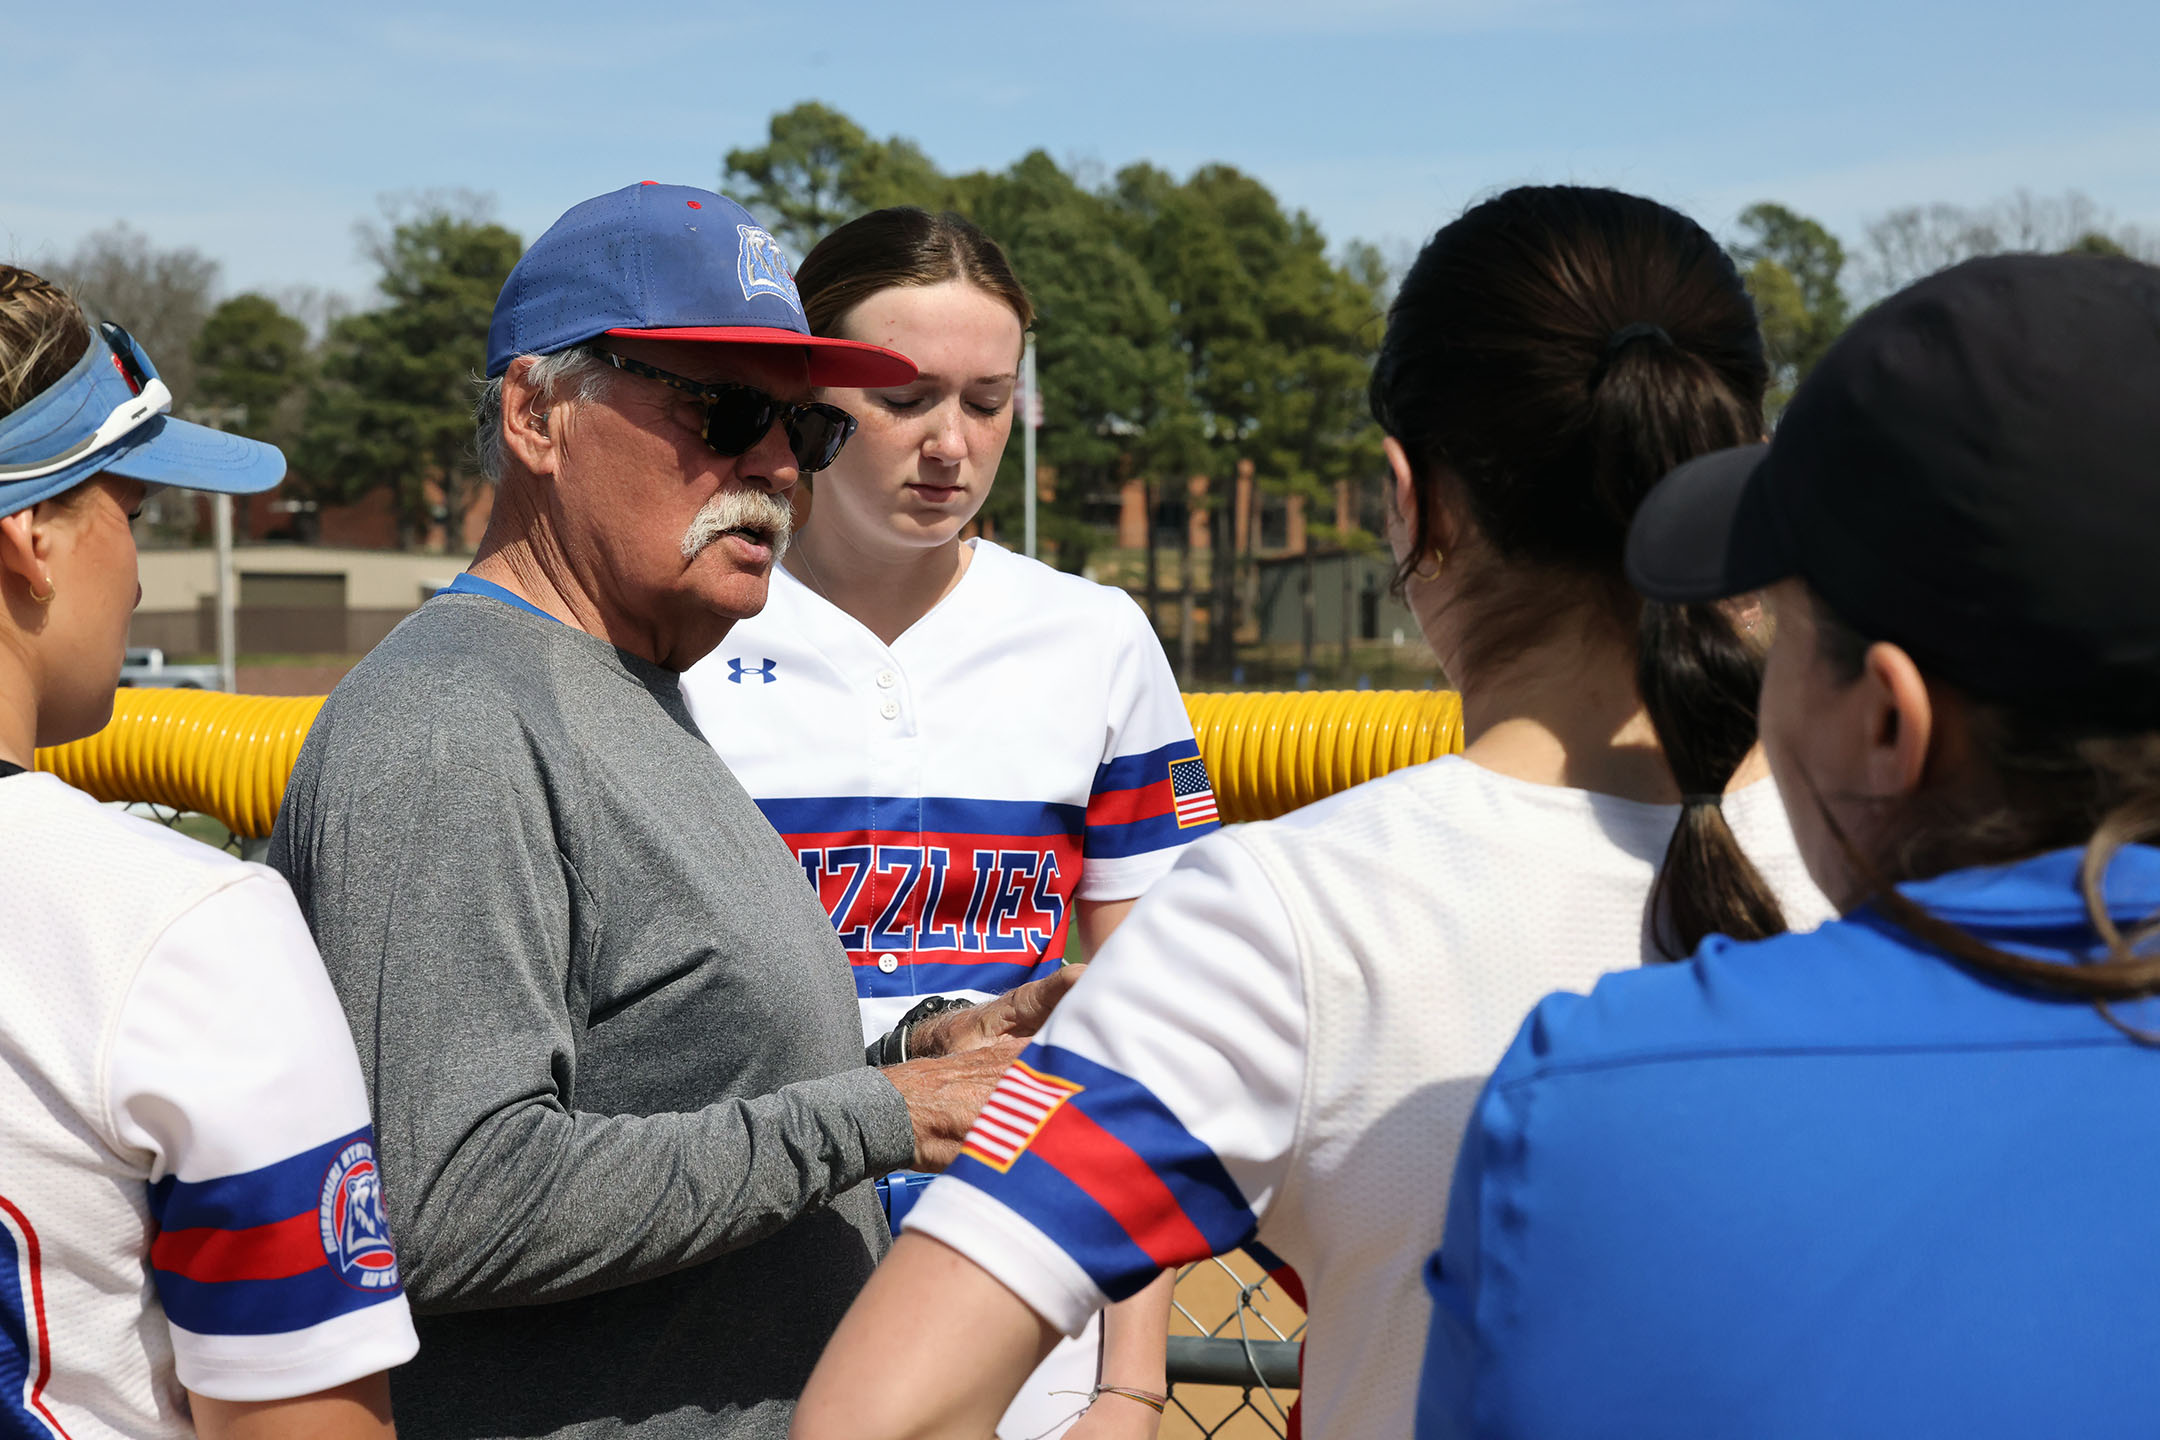 Grizzly Softball Head Coach Don Long gives last minute instructions to his team before a recent home game. (MSU-WP Photo)